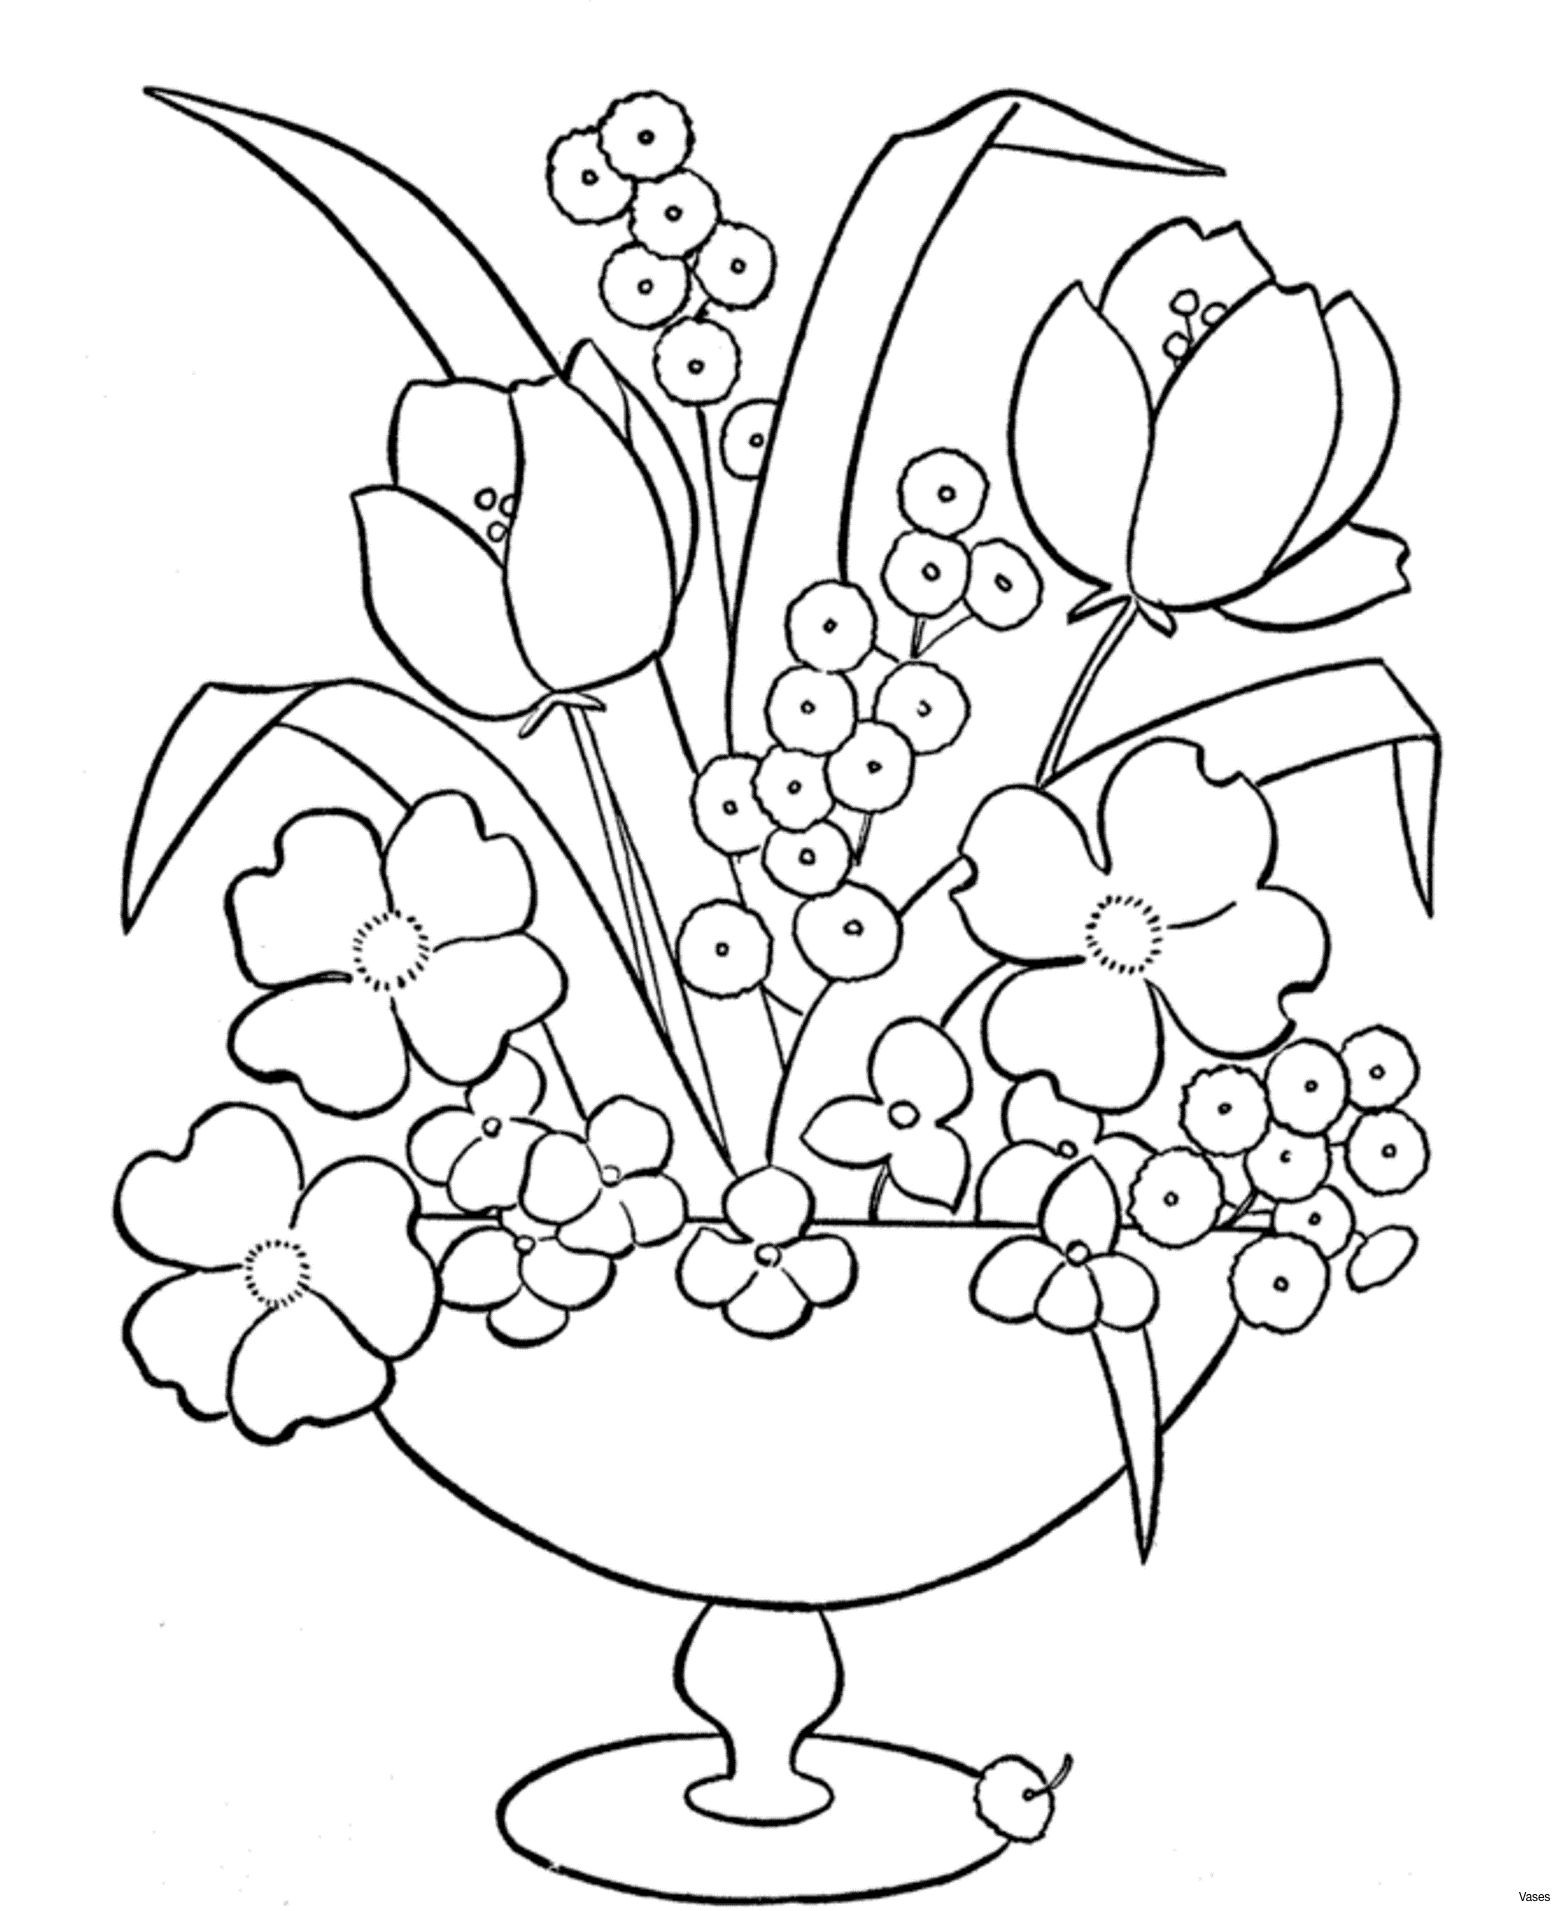 15 Unique Volkswagen Bug Flower Vases 2024 free download volkswagen bug flower vases of 23 flowers in a vase the weekly world in cool vases flower vase coloring page pages flowers in a top i 0d ruva